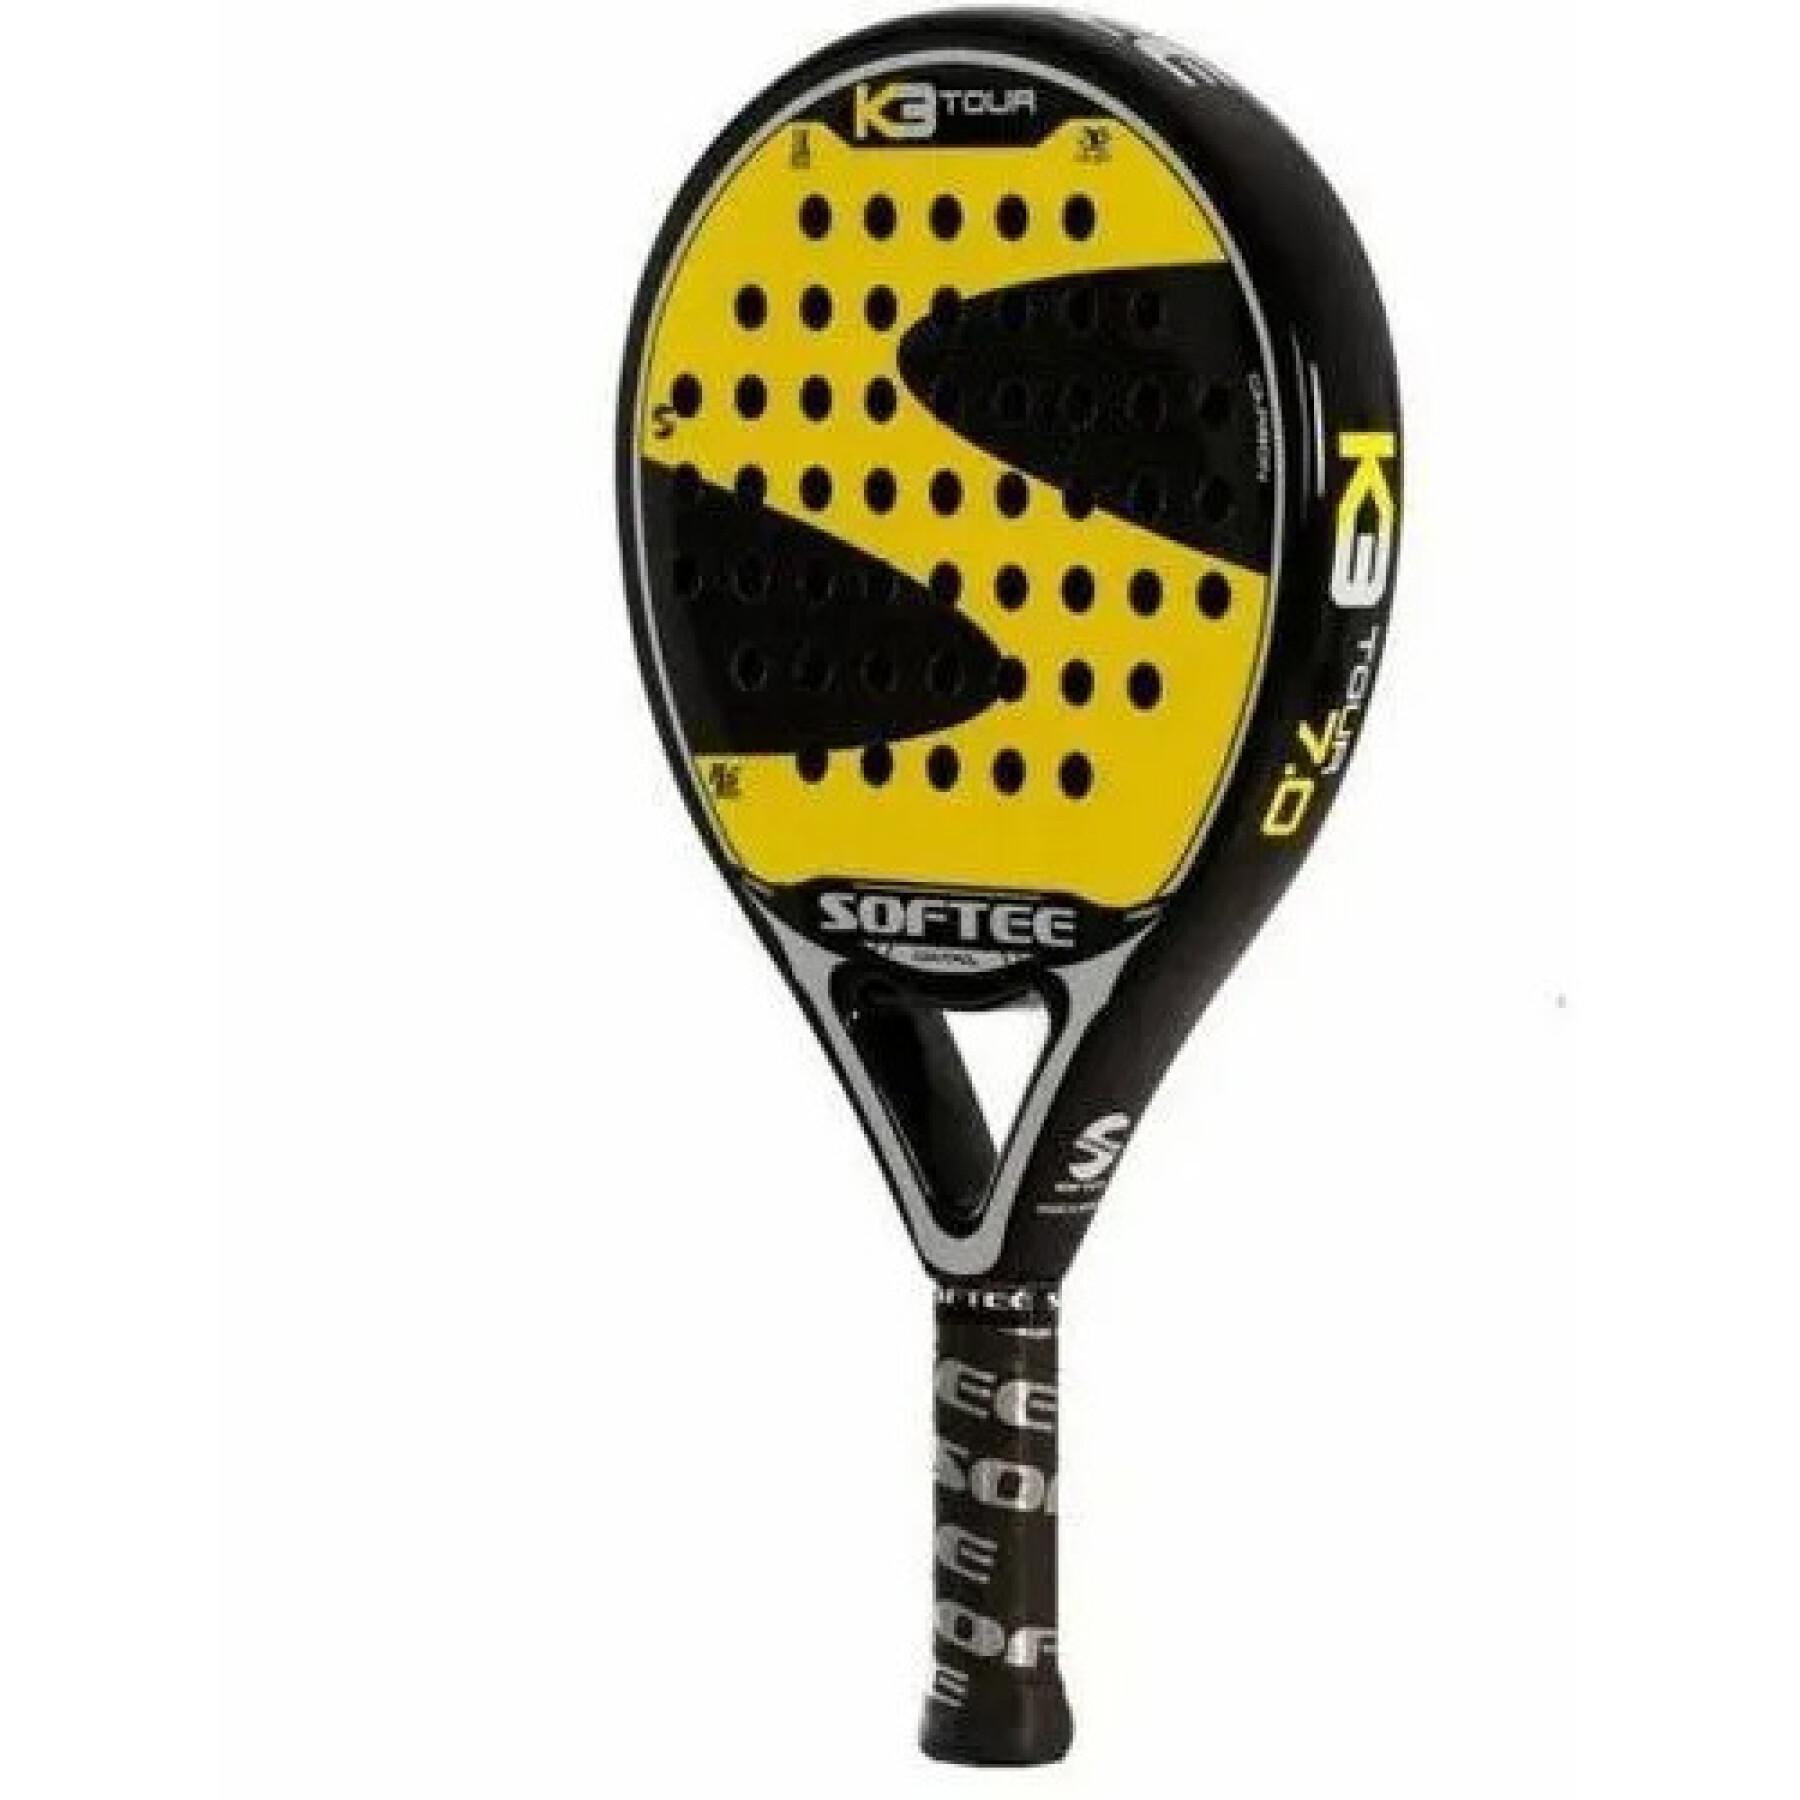 Racket from padel Softee K3 Tour 7.0